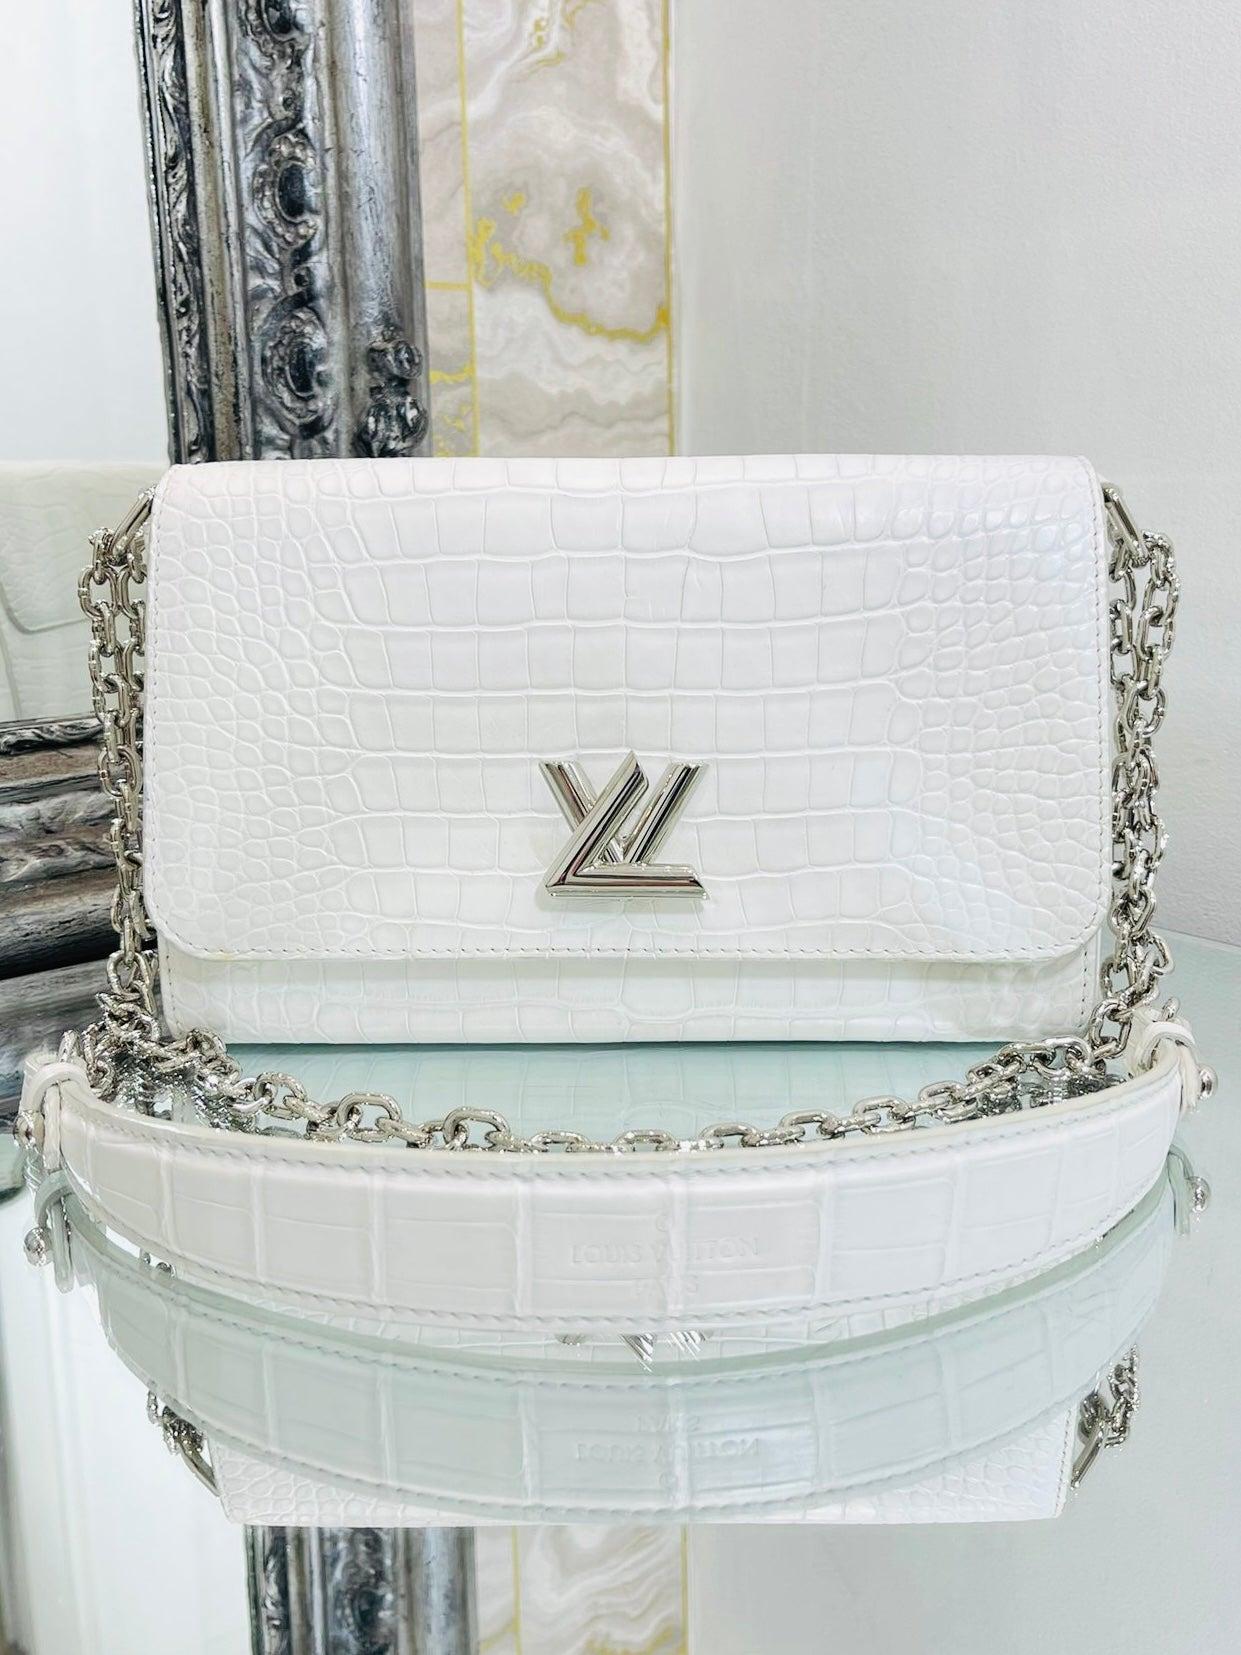 Louis Vuitton Crocodile Skin Bag Twist Bag

Matte white exotic skin bag with shiny silver hardware. Twist 'LV' logo closure and sliding should and Crocodile skin/leather shoulder/crossbody strap.

Additional information:
Size – 23 W x 9 D x 16 H